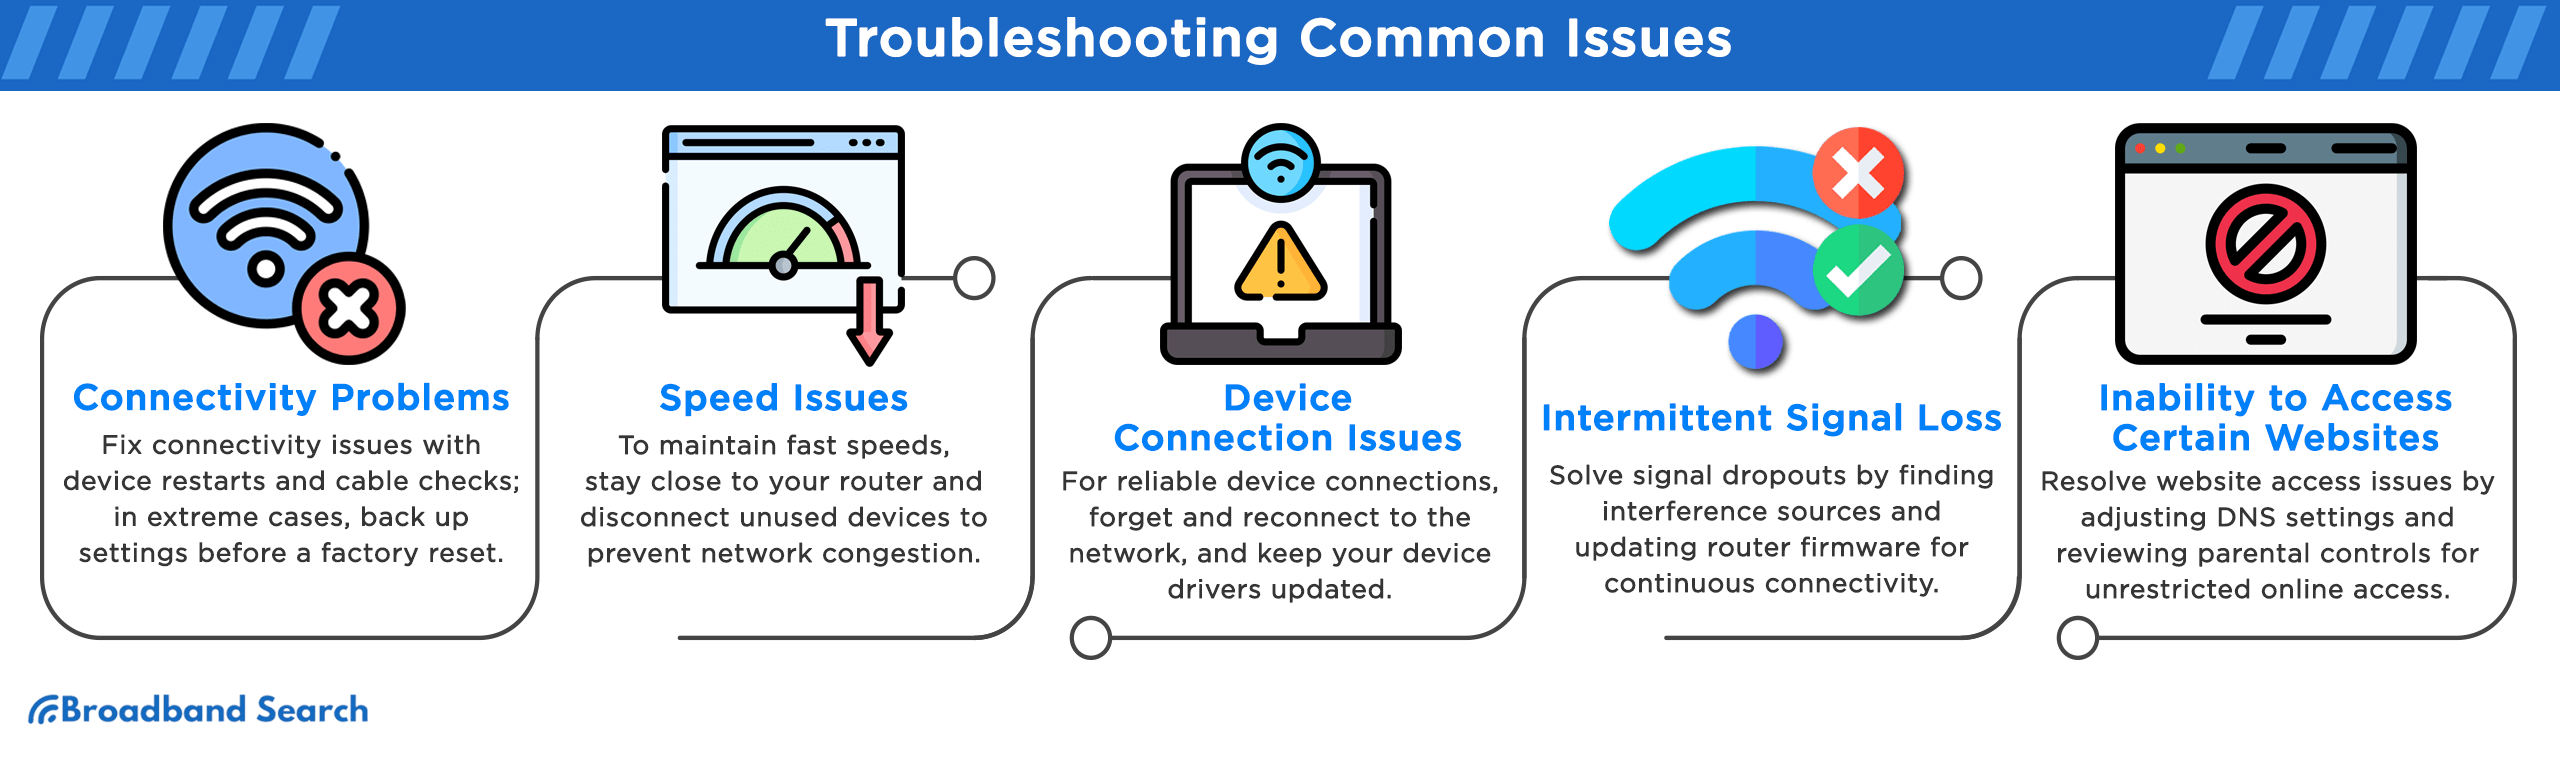 How to troubleshoot common issues